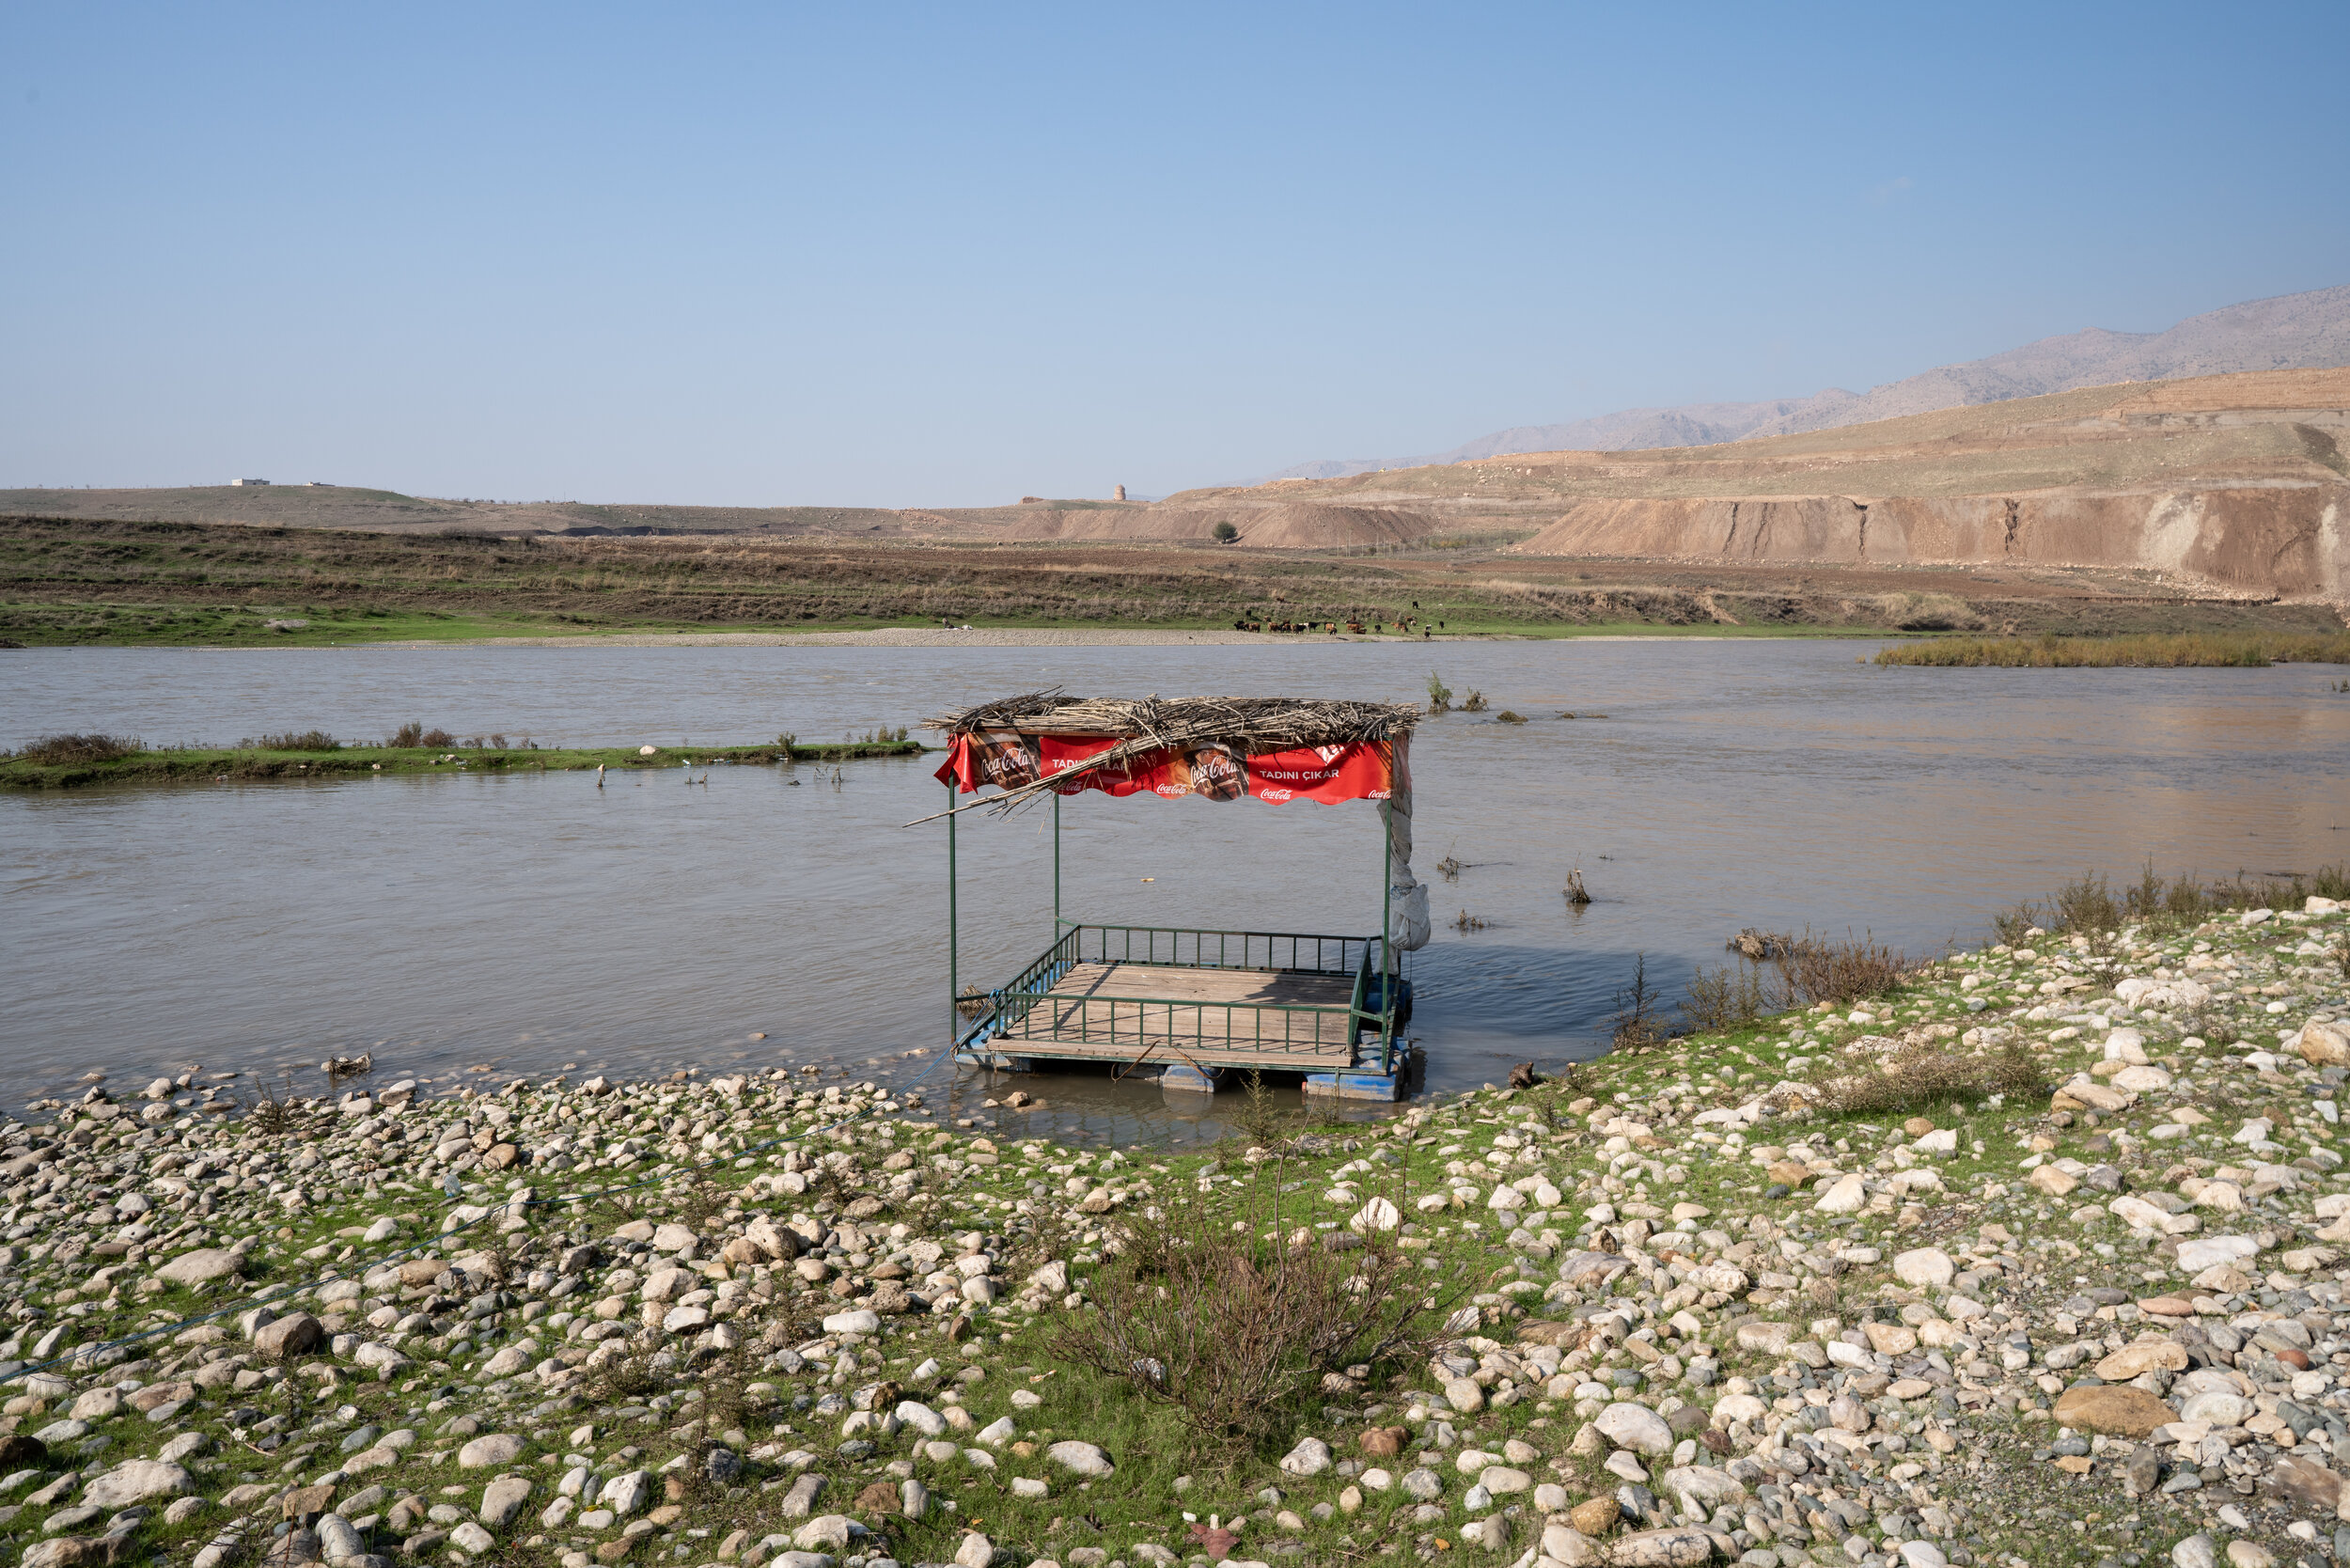 A cardak from one of the Hasankeyf's riverside cafes rests downriver of the city.